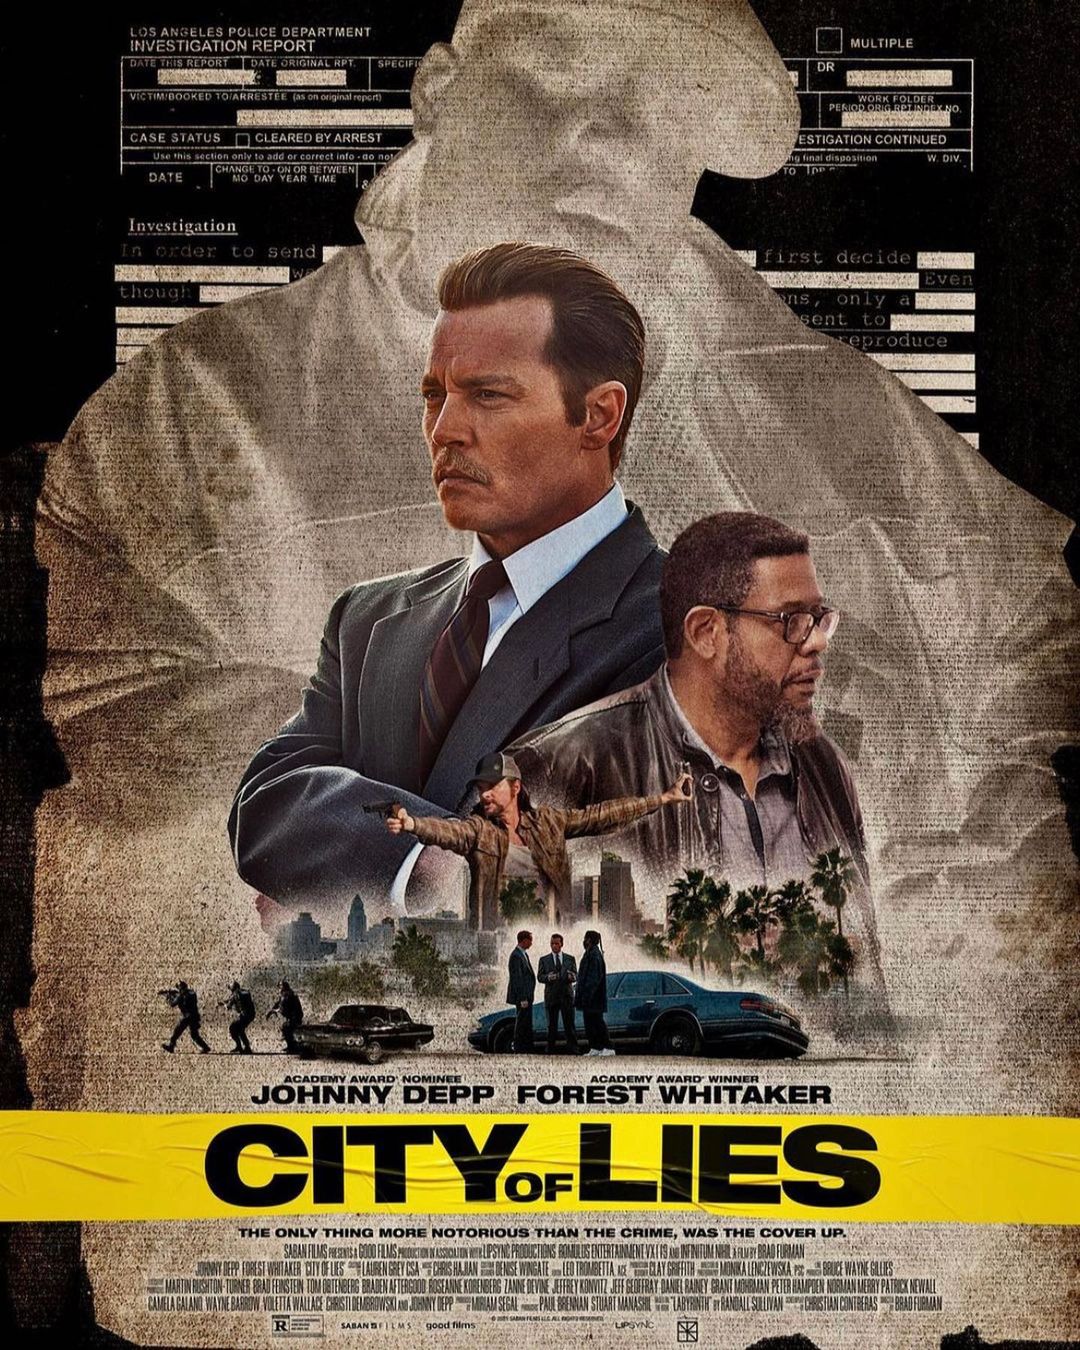 Thank you to Voletta Wallace and the Poole family for allowing Brad, Forest, myself and the crew to tell this timely and important story.

Truth is a rare bird. All the more reason to search for it.

‘City of Lies’ in US theatres today. VOD on April 9th. More territories to be added soon.
-
@thenotoriousbig @volettawallace @bradfurman @forestwhitaker @saban_films @infinitumnihil_ @kpoole12 @randallsullivan4 @jess_fuerst @sunstrokehouse #cityoflies